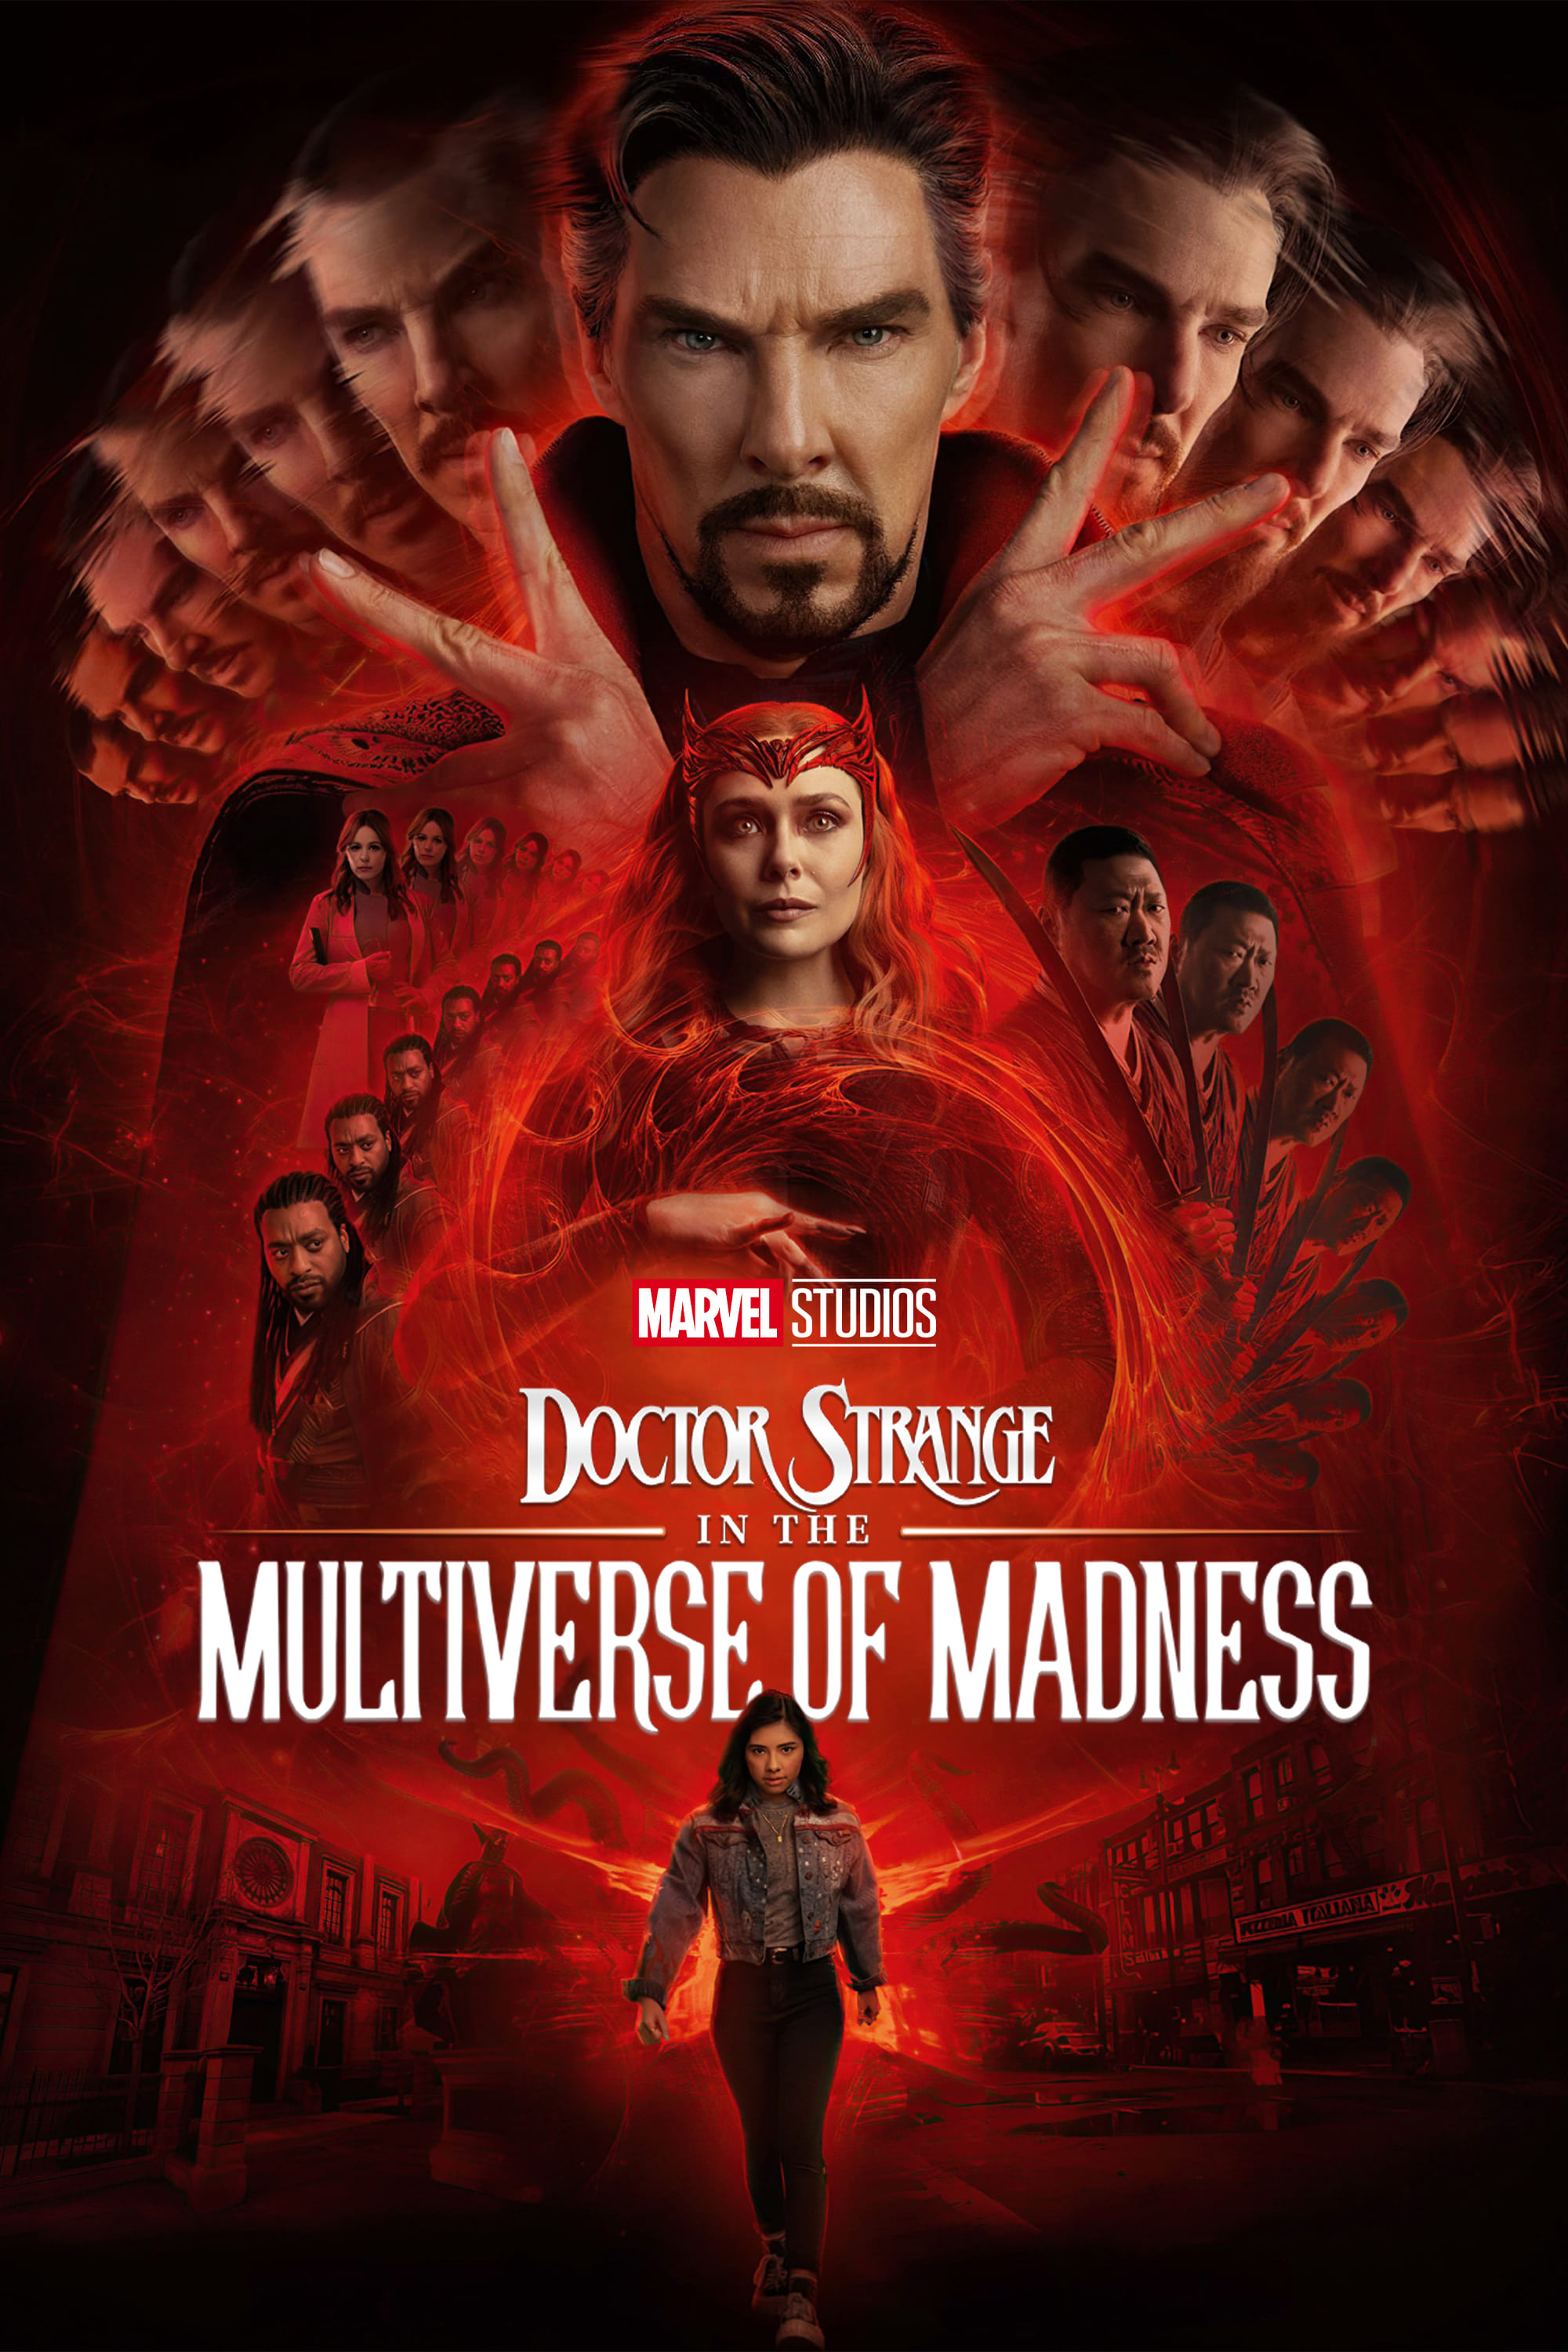 Download Doctor Strange 2 Multiverse of Madness (2022) Dual Audio {English +Hindi Unofficial} 720p [1GB]